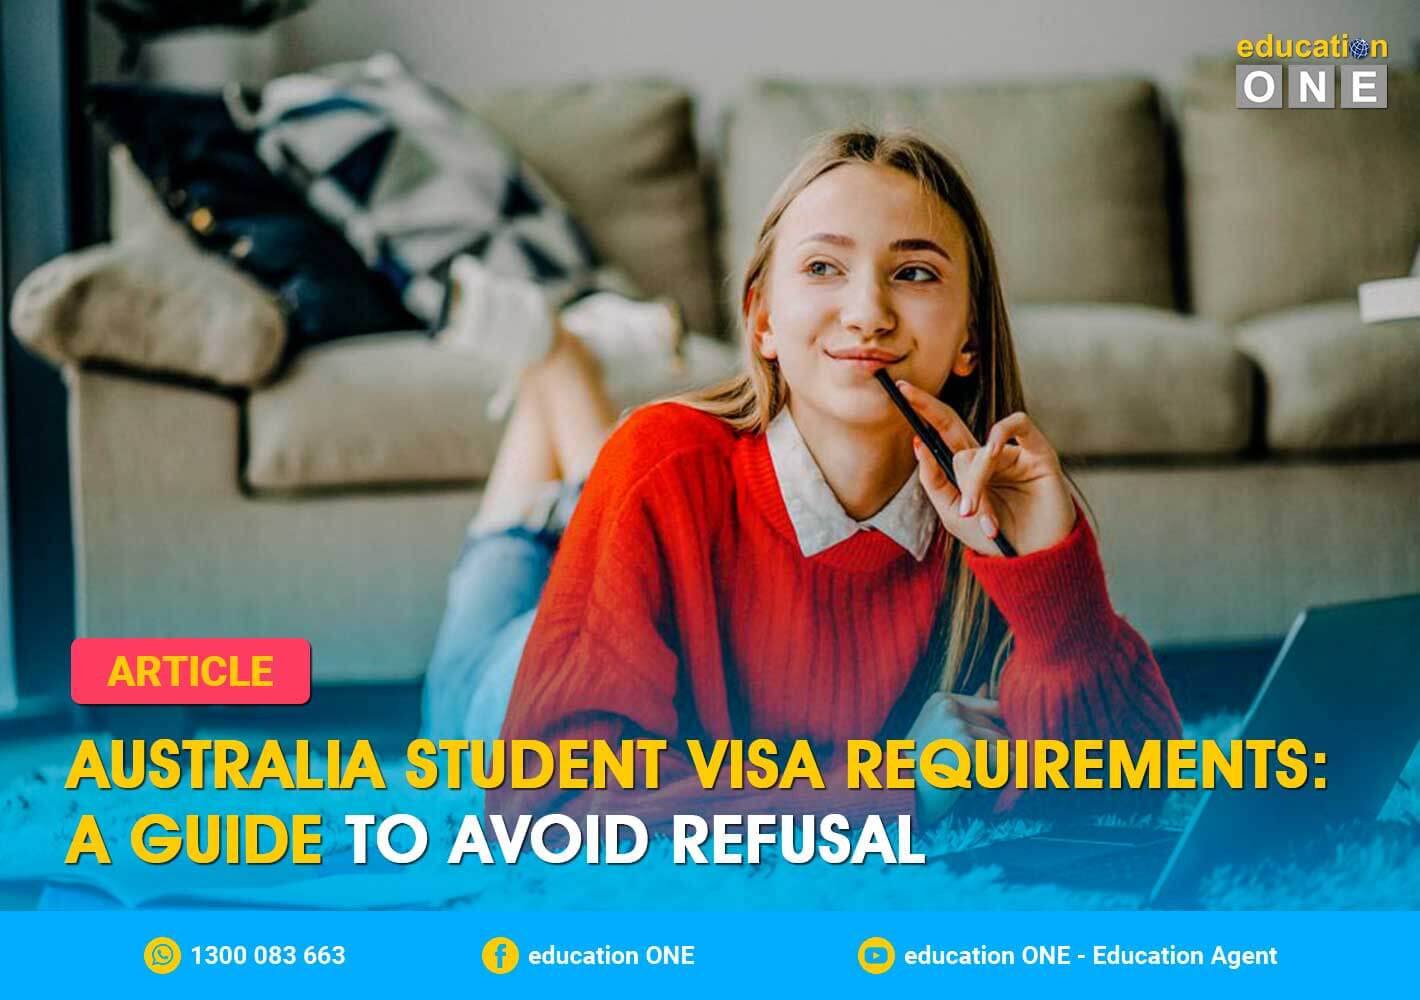 Australia Student Visa Requirements A Guide to Avoid Refusal